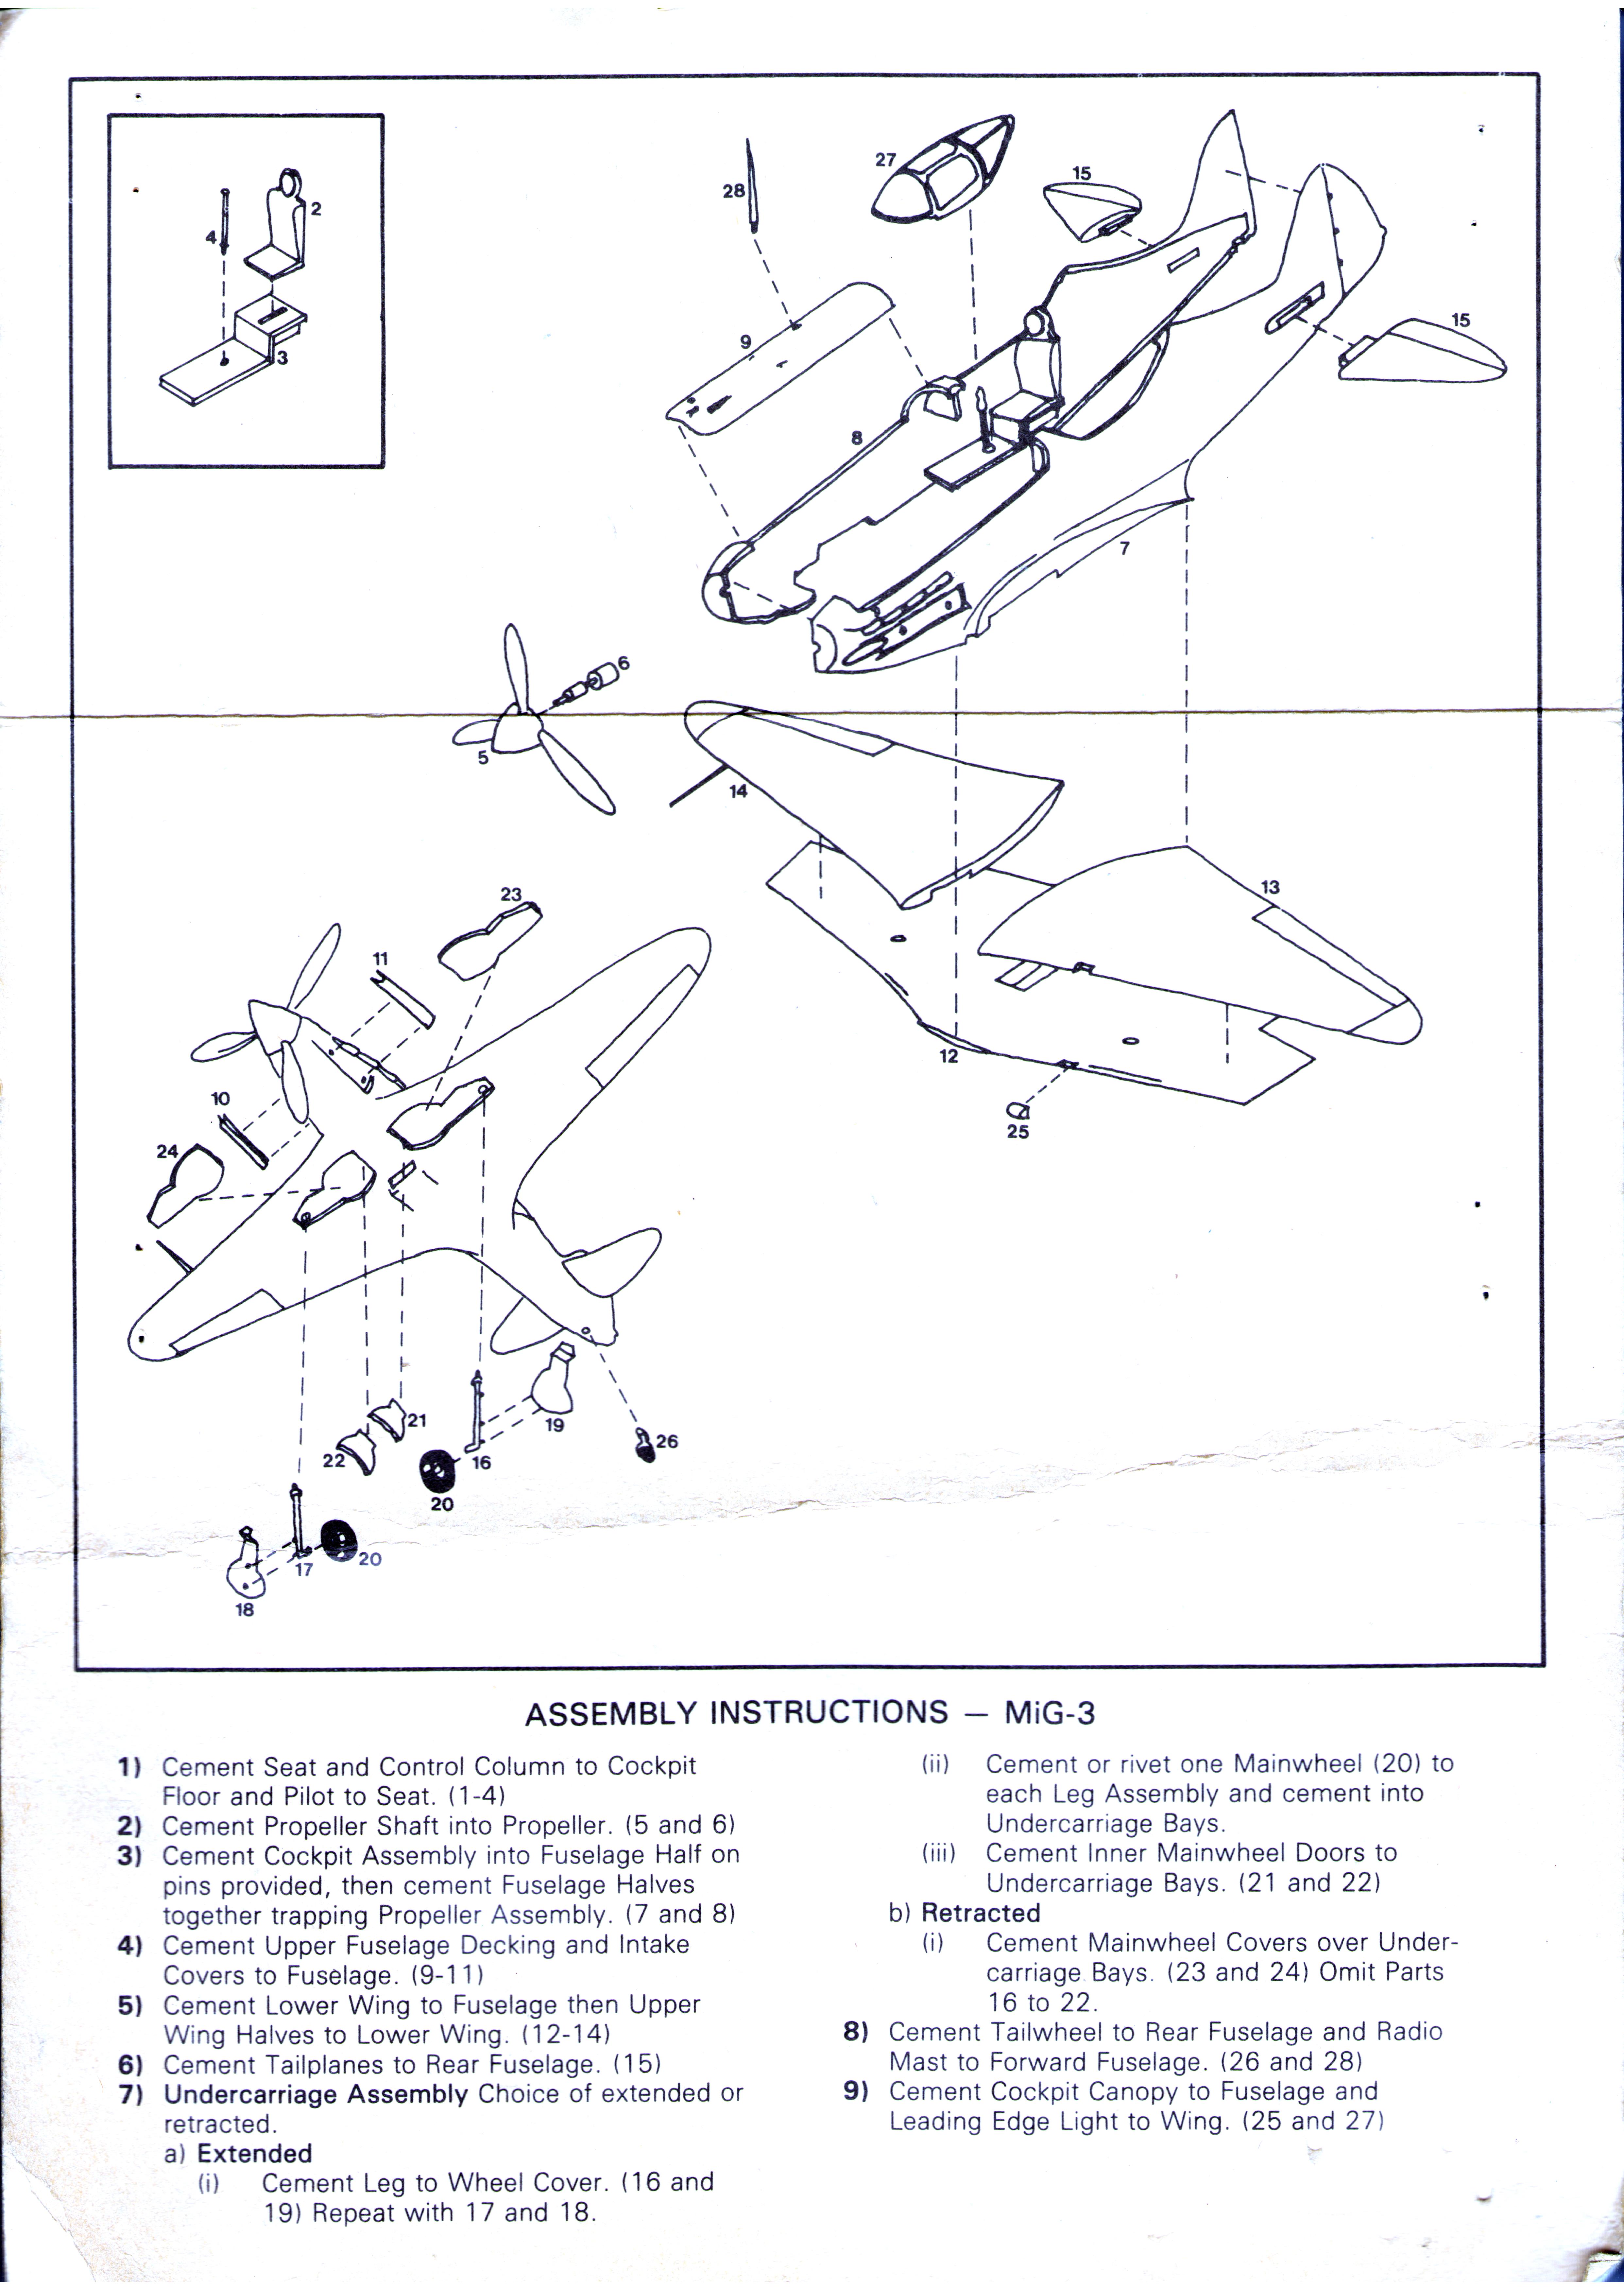 Red Star RS101 Mikoyan and Gurevich MiG-3, Red Star Model Kits Ltd, 1984 Assembly instruction